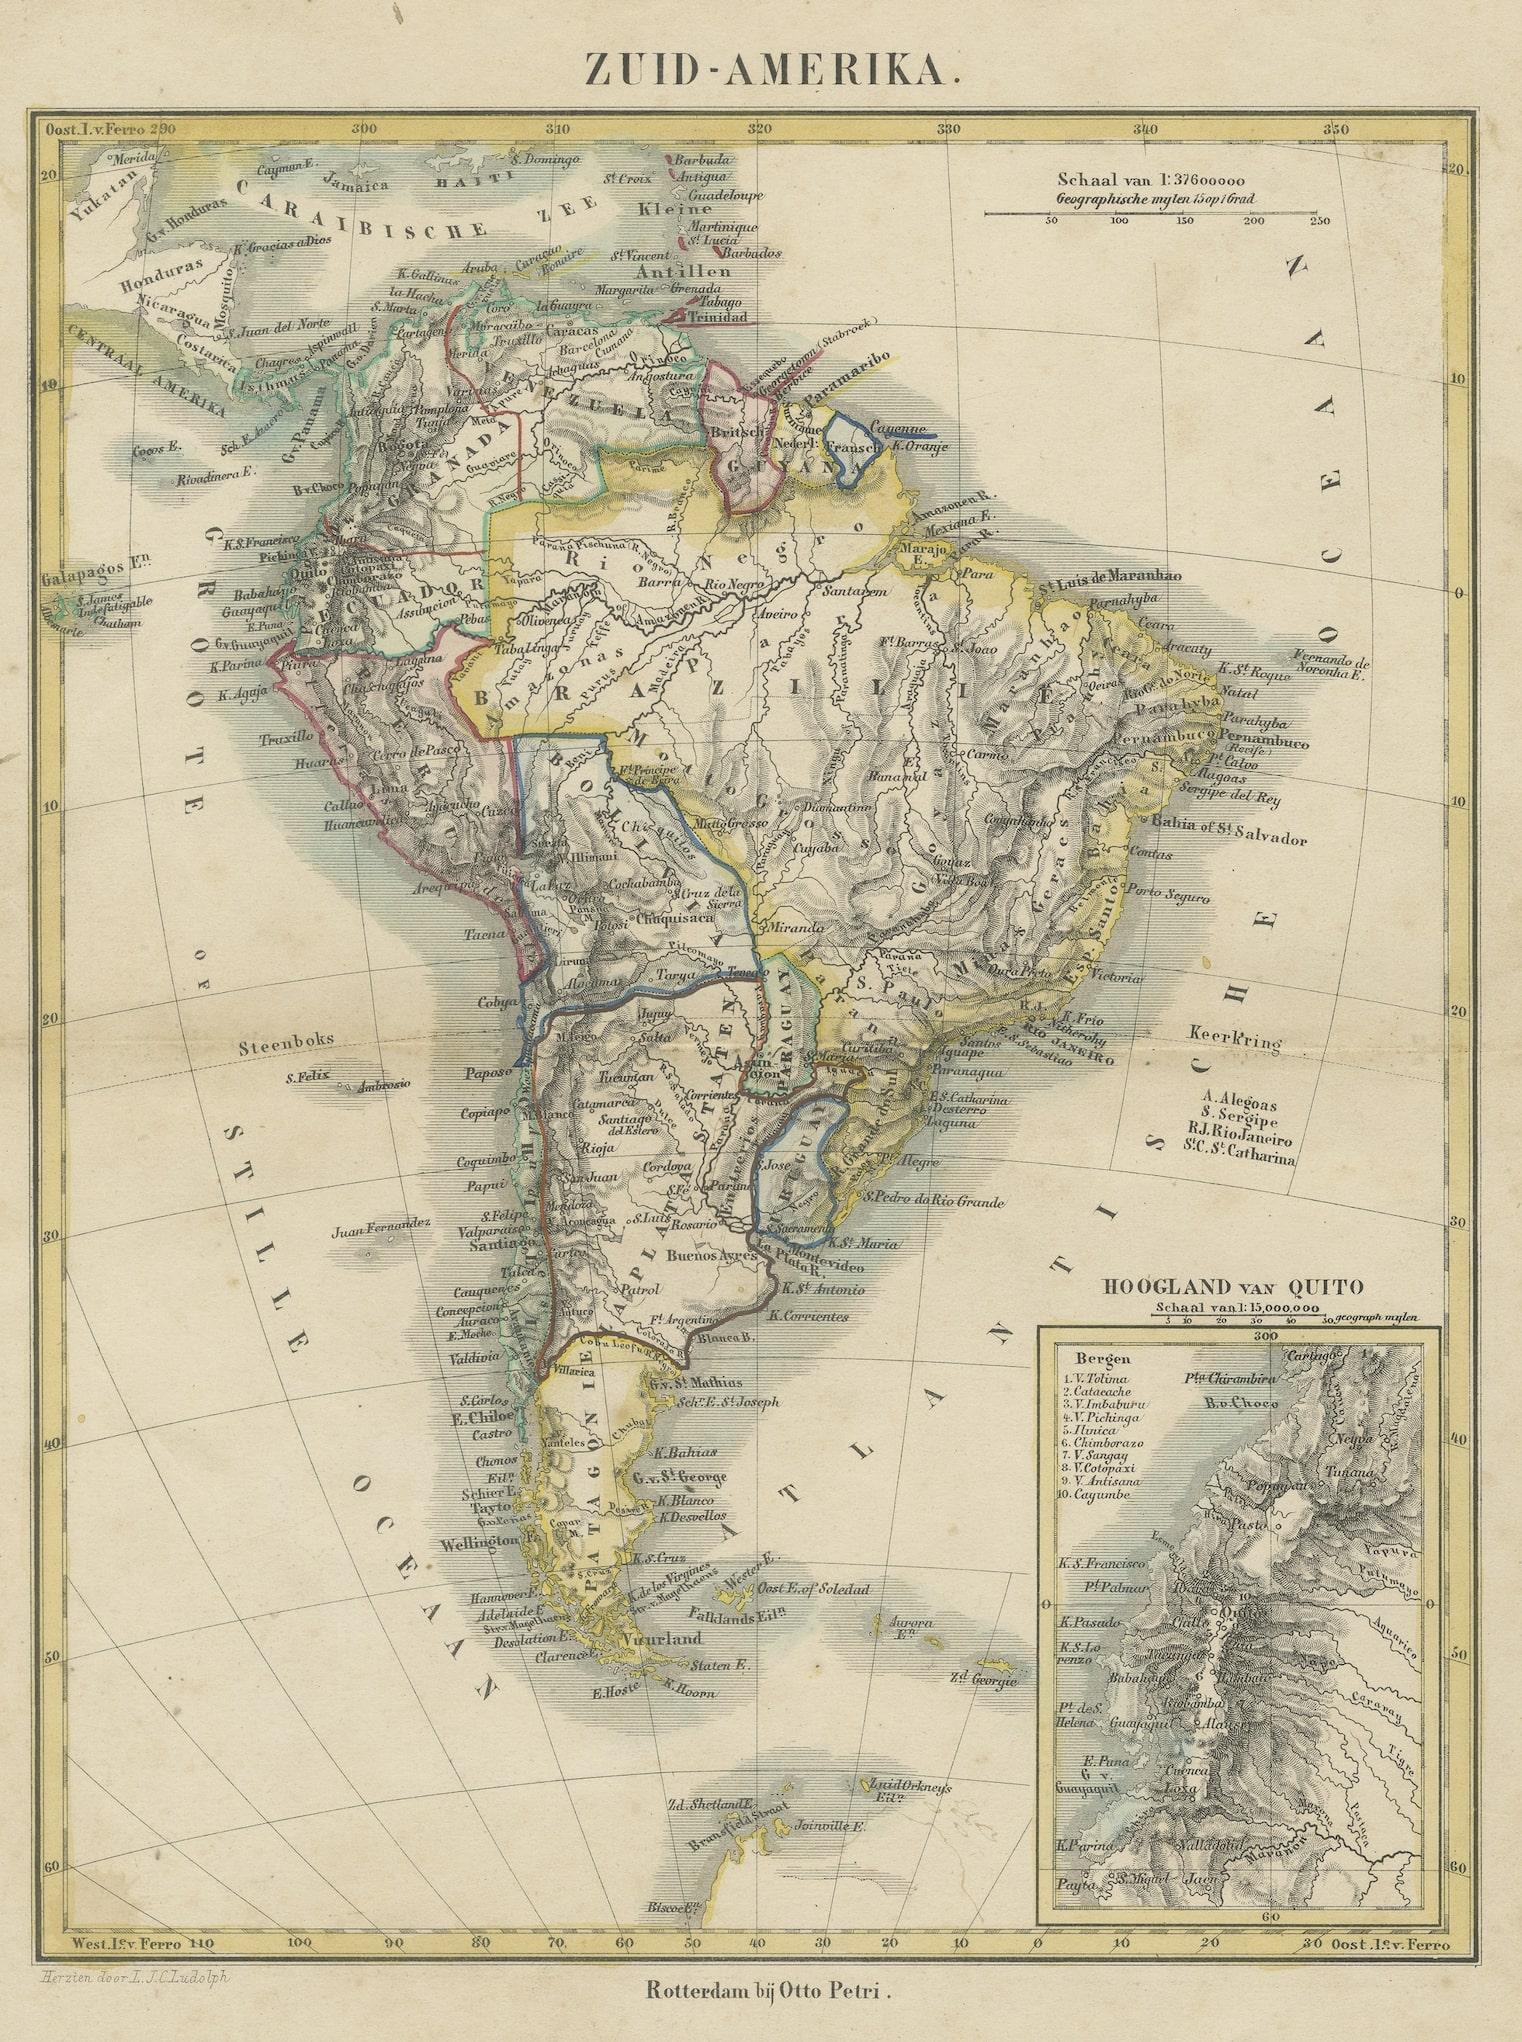 Antique map titled 'Zuid-Amerika'. Original antique map of South America including Brazil, Peru, Colombia, Ecuador, Venezuela, Guyana, Bolivia, Paraguay, Uruguay, Chile, Argentina. Inset map of the mountains of Quito. Published by Otto Petri, circa